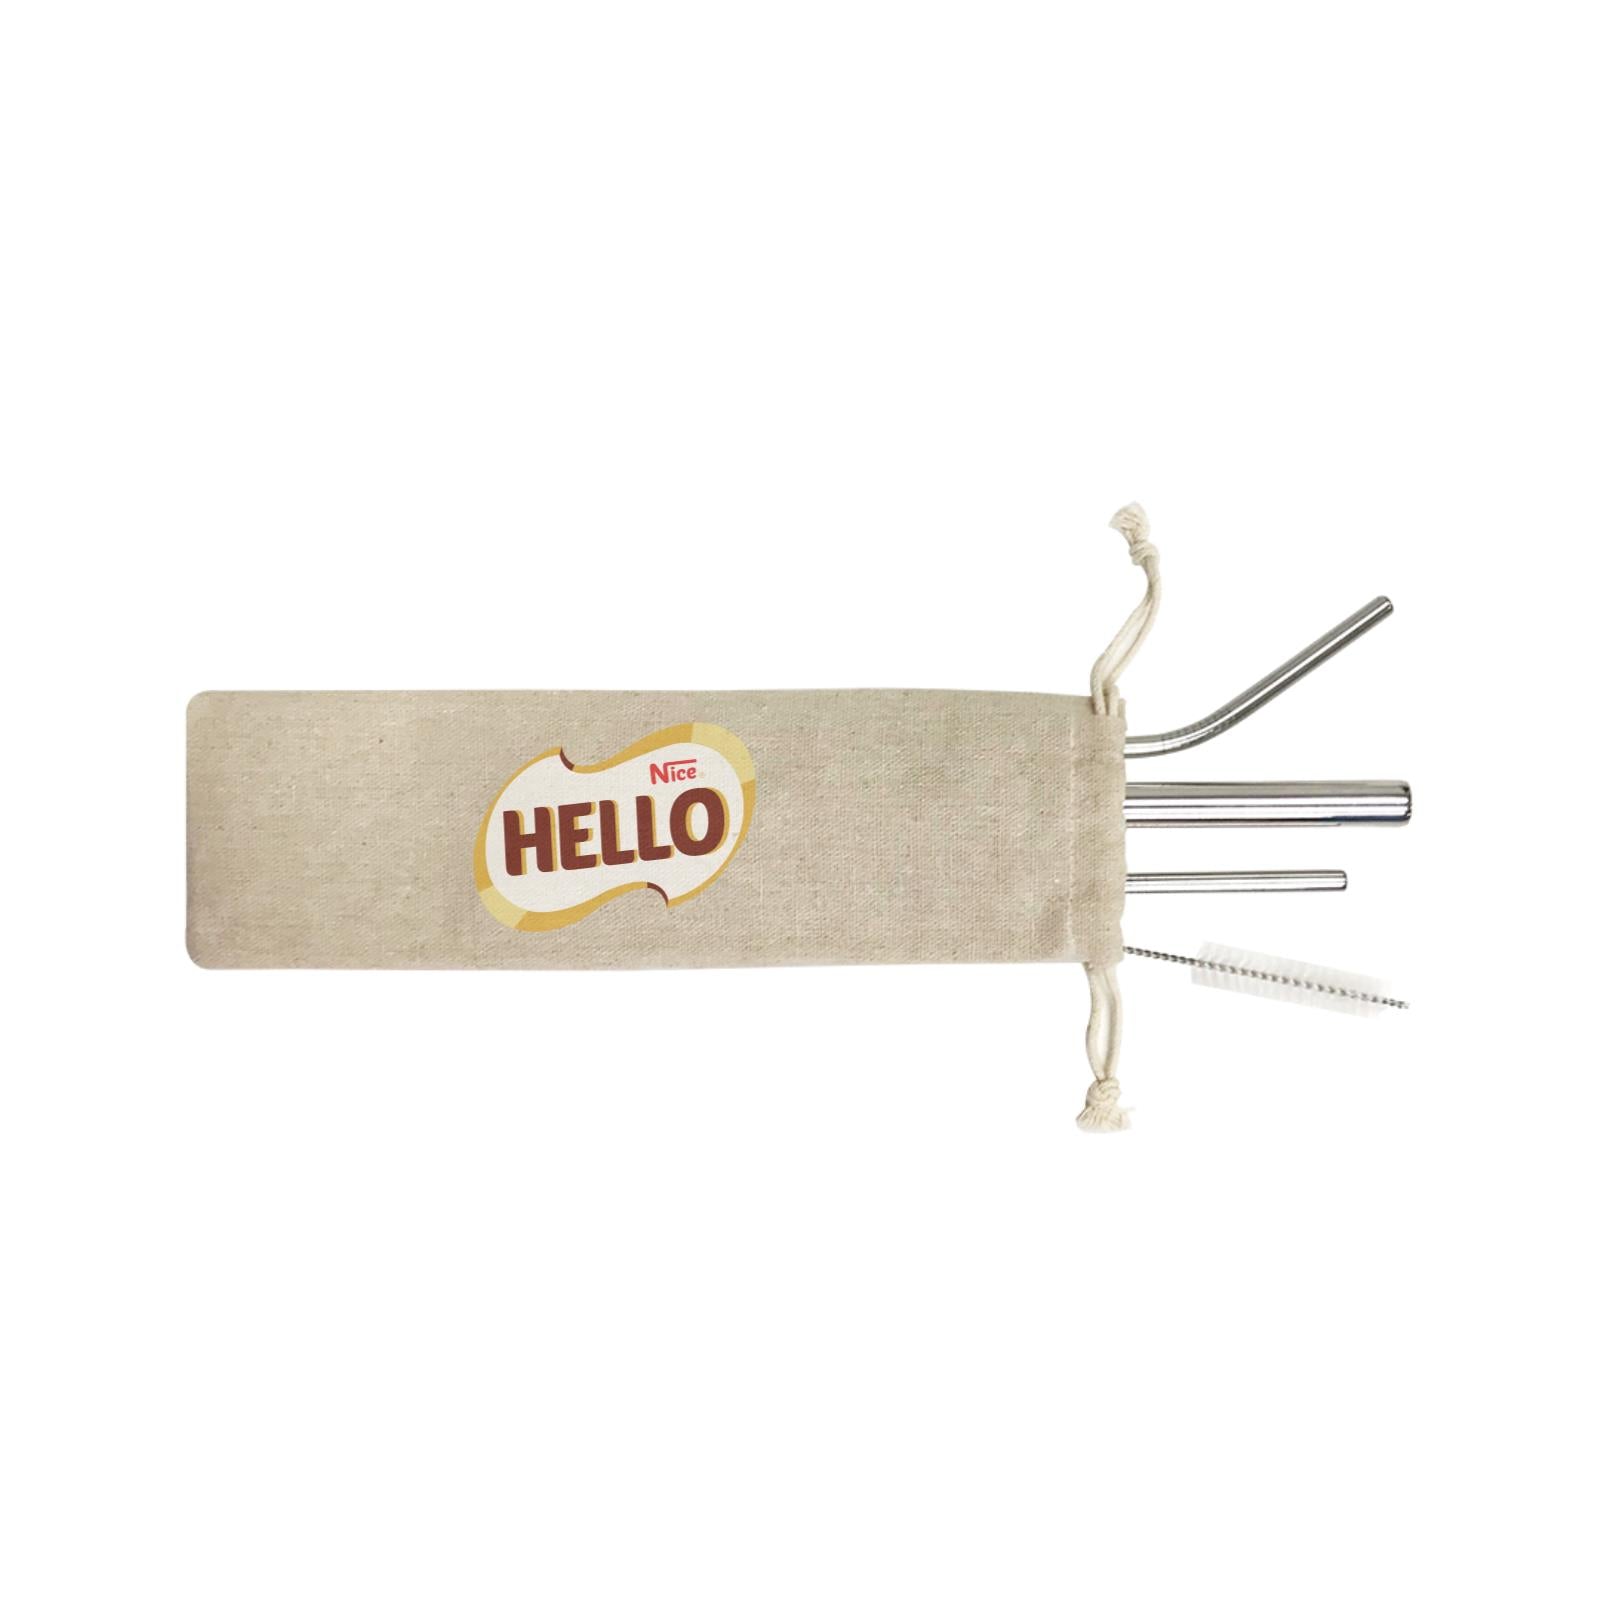 Slang Statement Hello Nice 4-in-1 Stainless Steel Straw Set In a Satchel